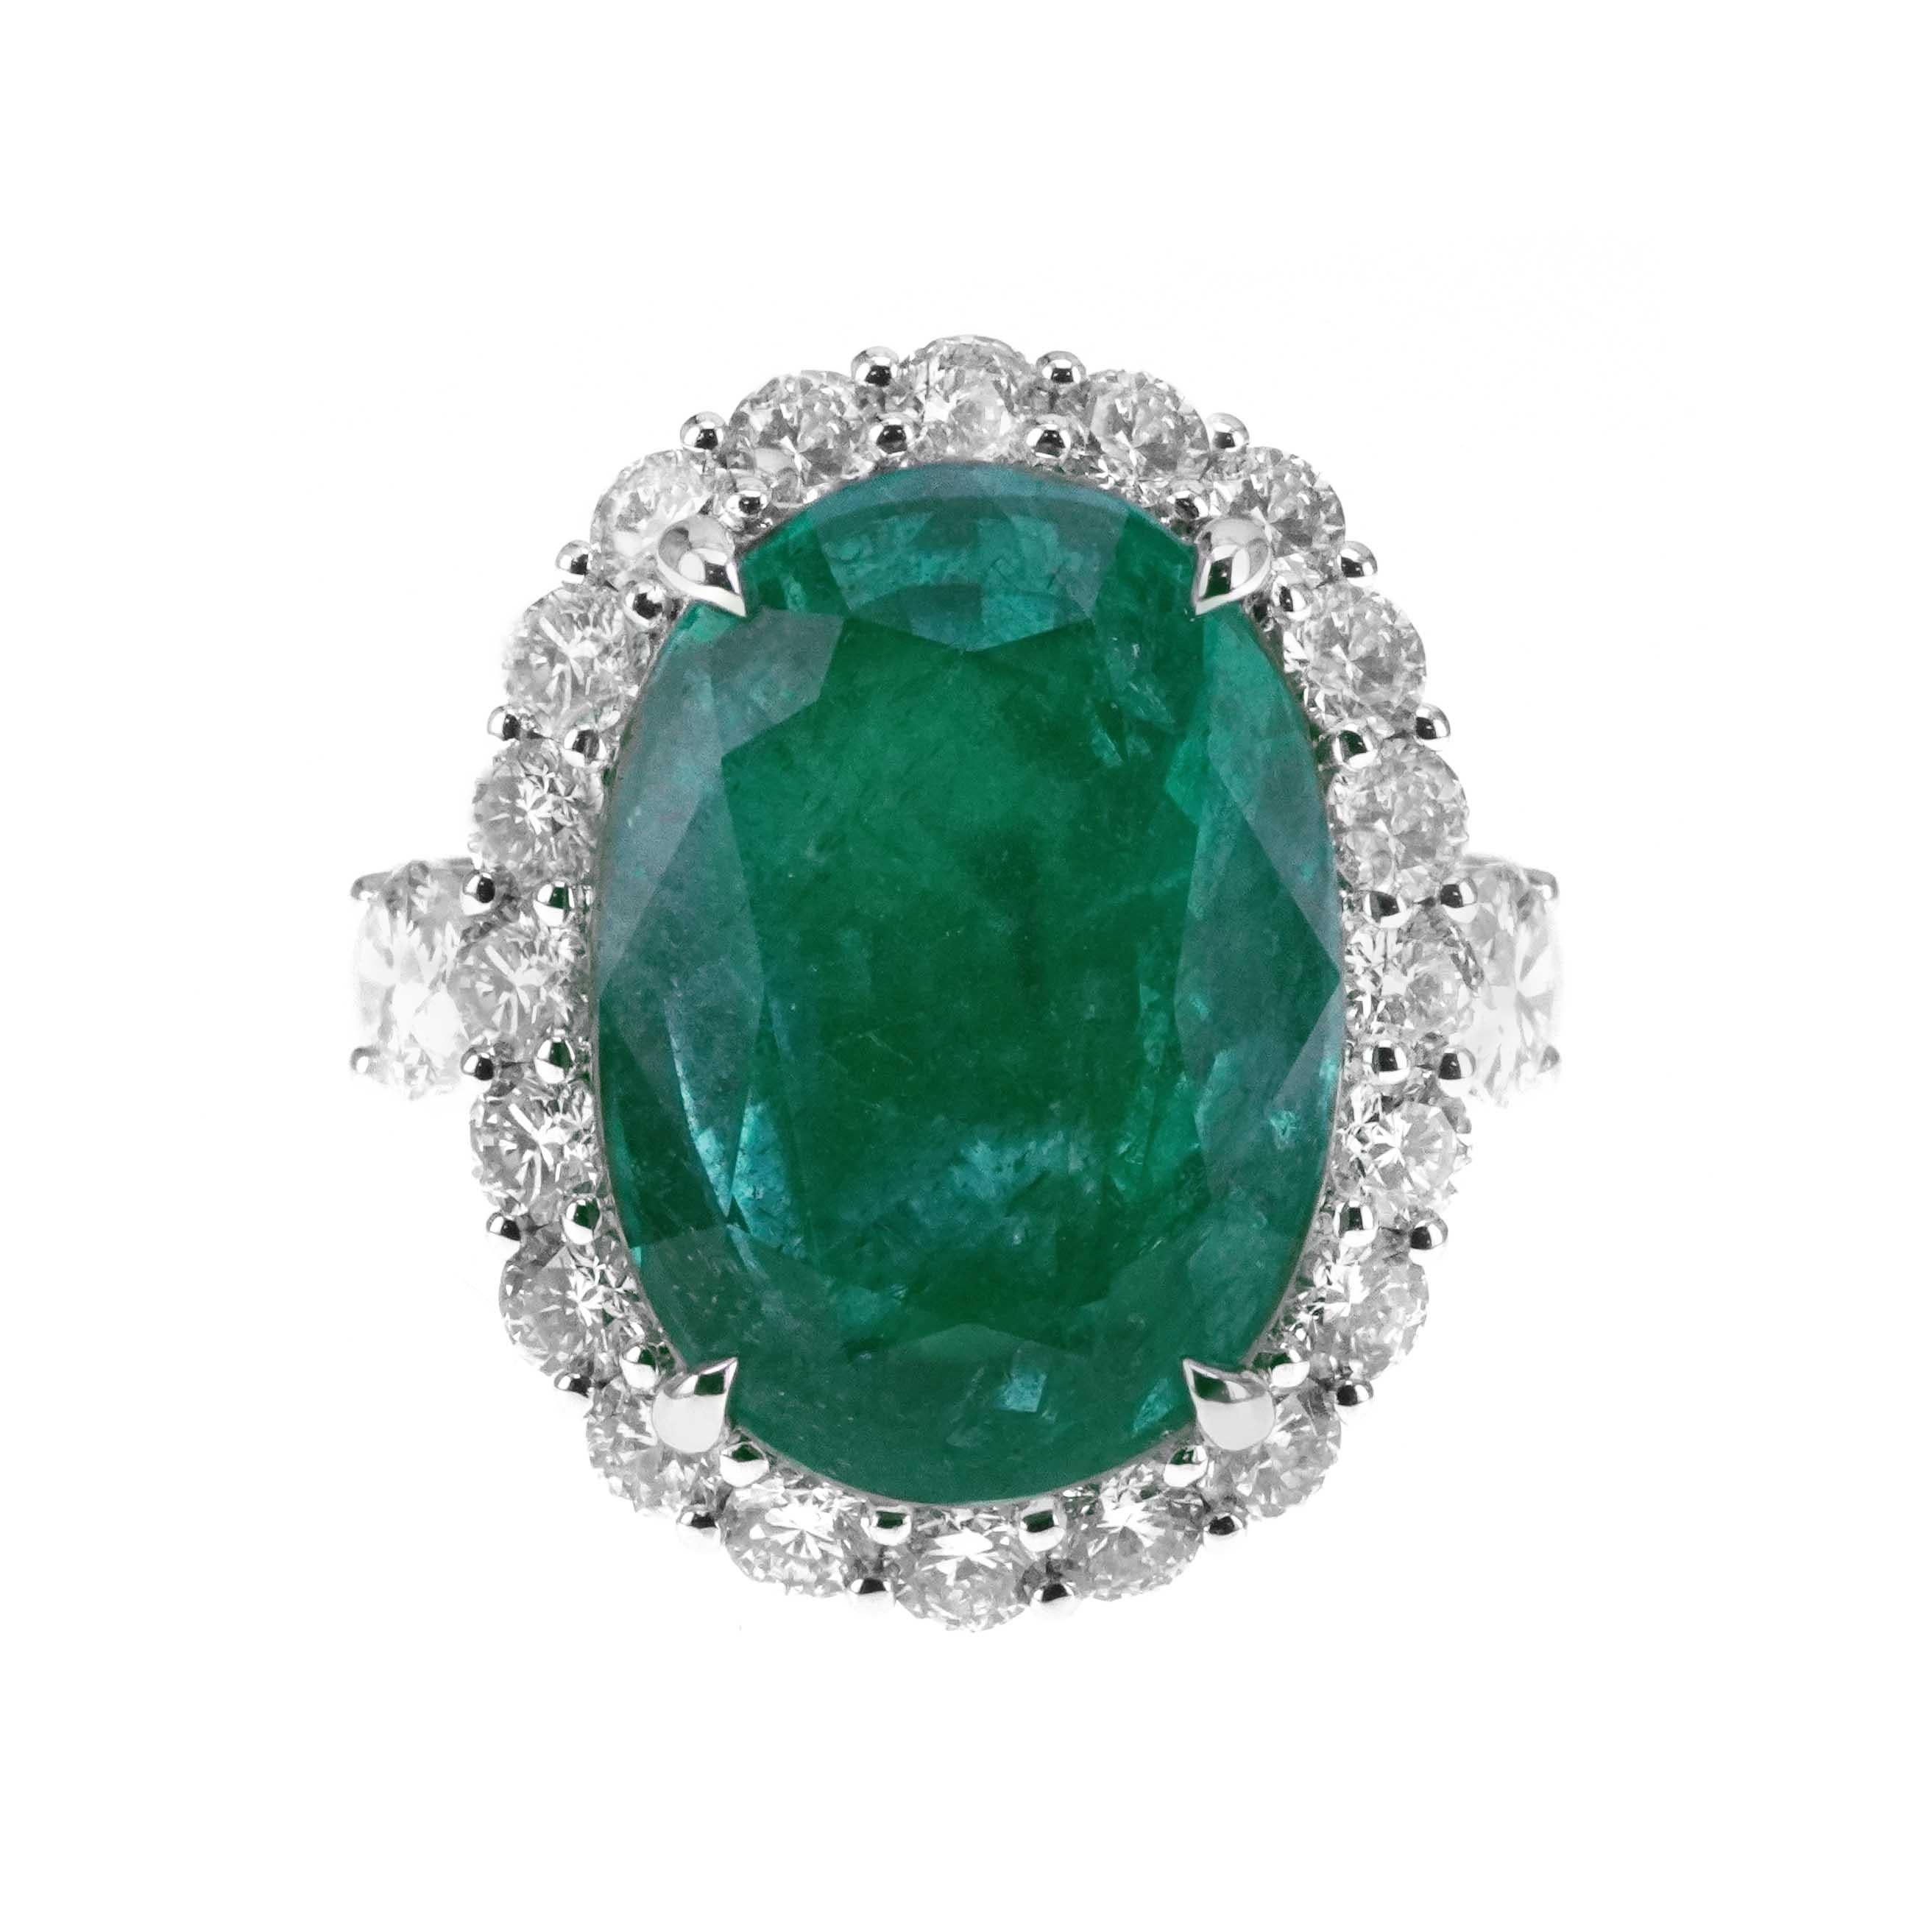 An IGI Certified Zambian Emerald is set along with 1.58 carat of white diamond in this ever classical solitaire 18K hand made gold ring. The ring has been hand made in Hong Kong. The details of the diamond are mentioned below:
Color: F
Clarity: